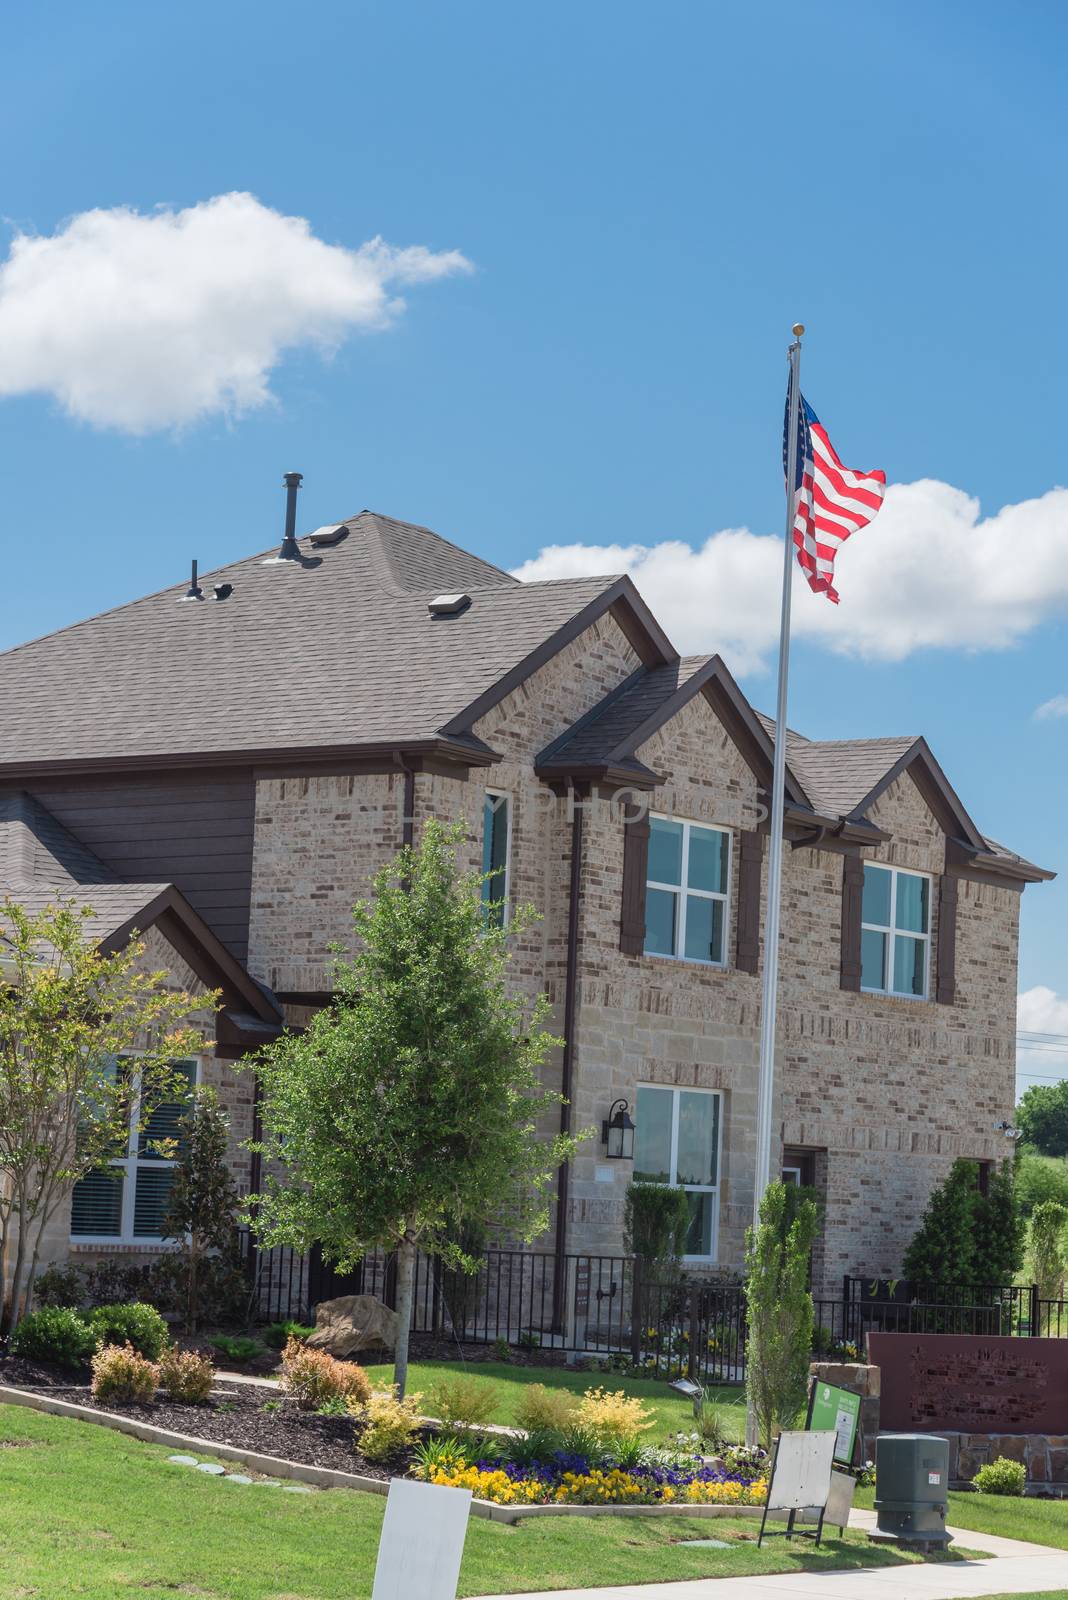 New model single-family house with American flag near Dallas, Texas by trongnguyen